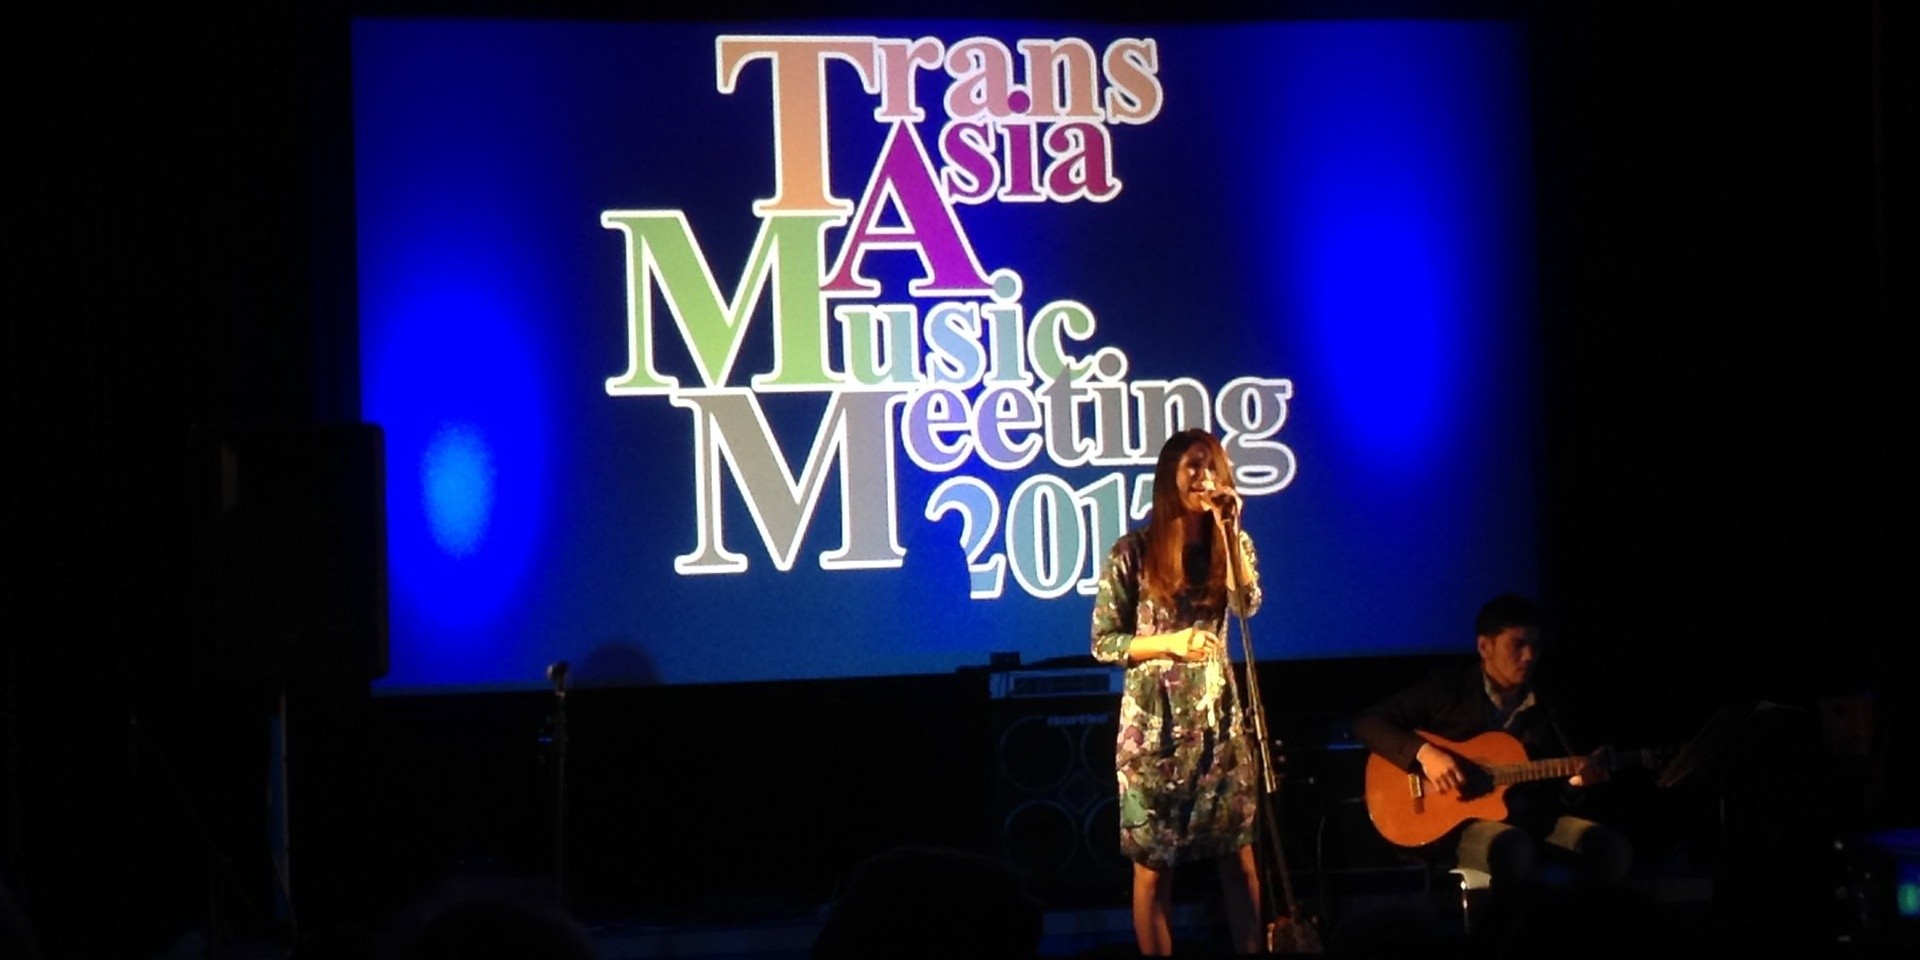 The fifth Trans Asia Music Meeting is set to take place in Japan this weekend